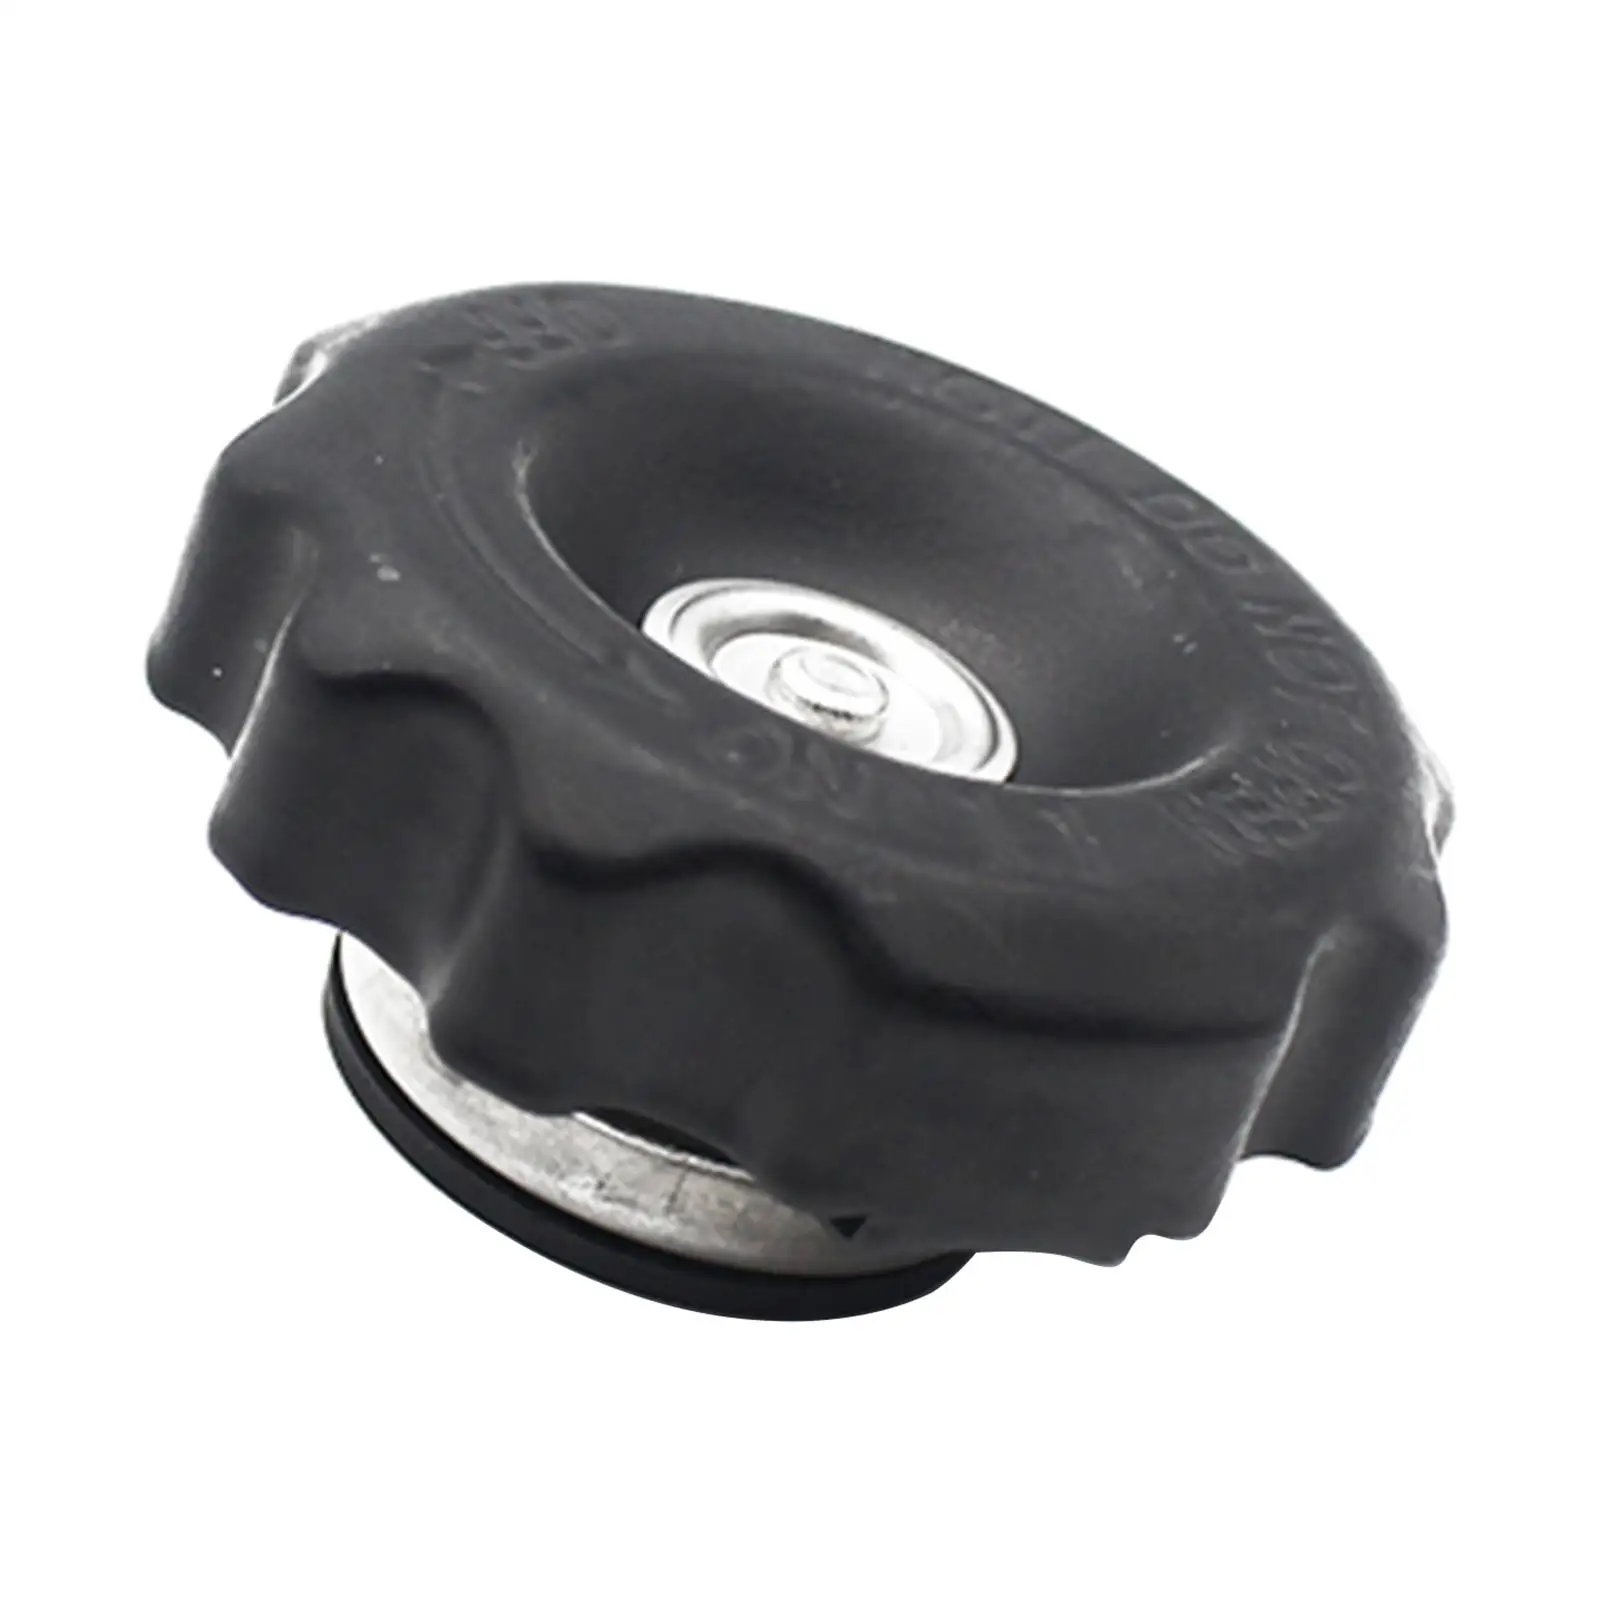 Motorbike Radiator Caps Cover Aluminum Alloy Assembly for Motorcycle Part